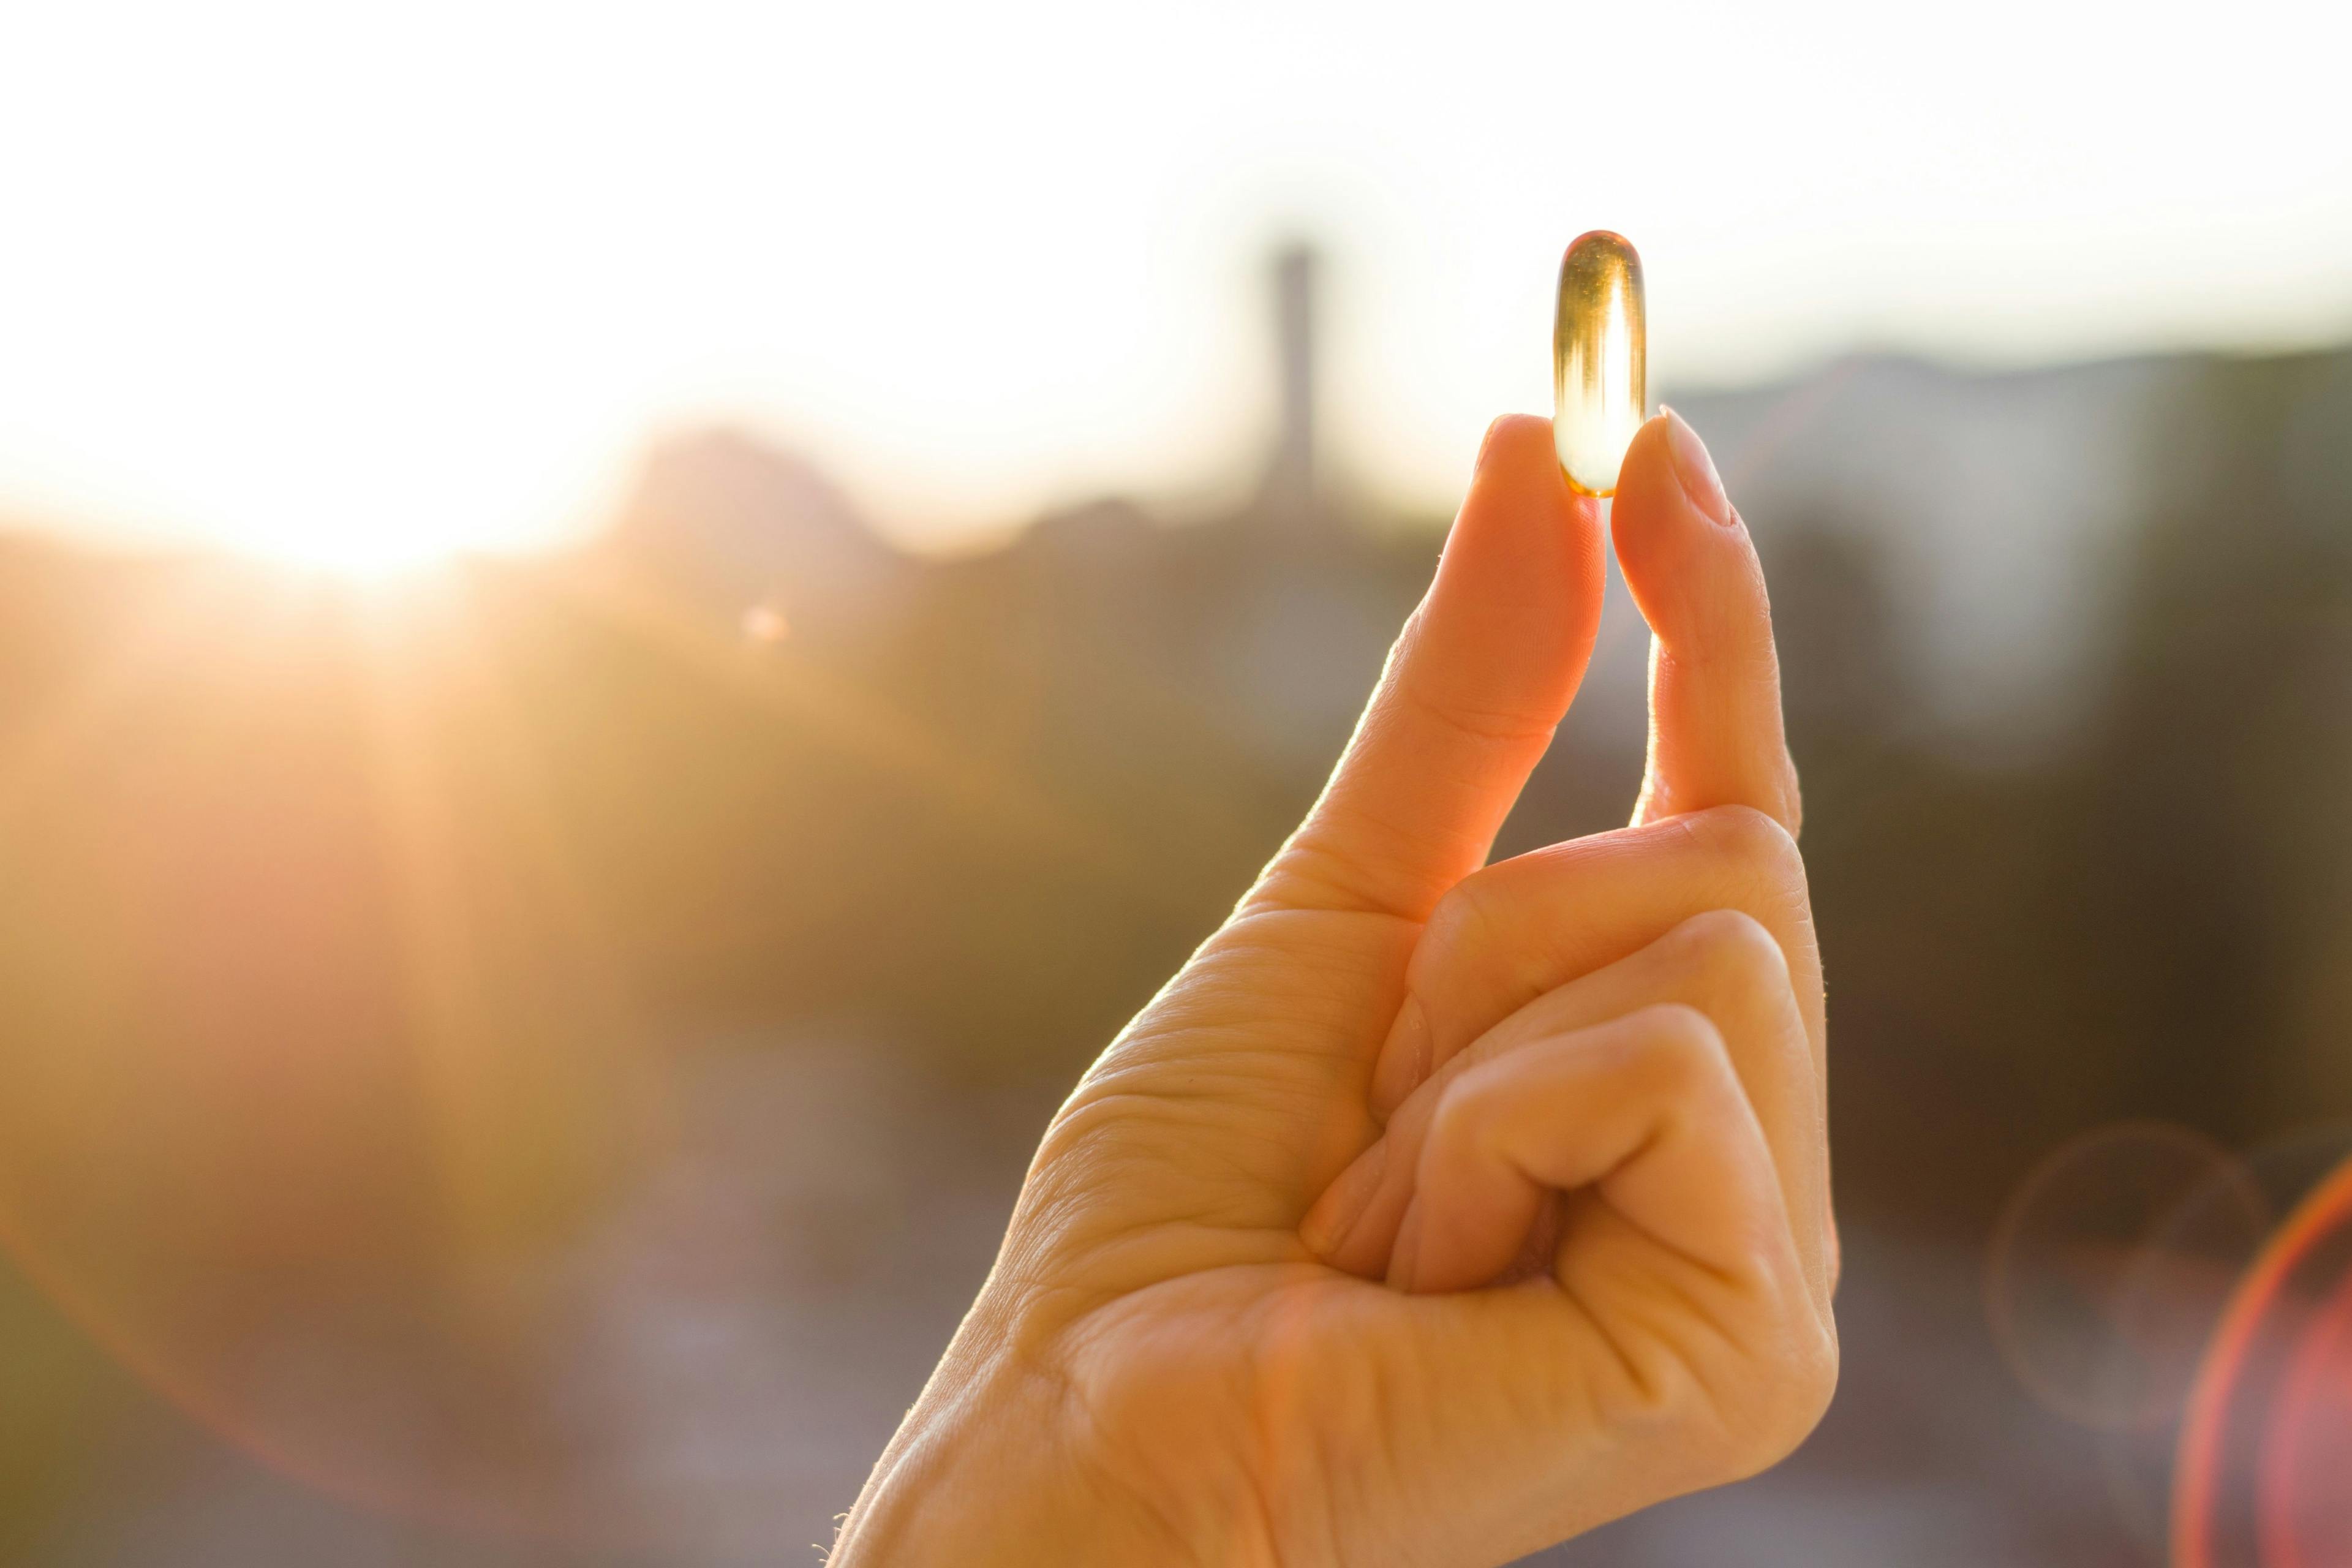 Hand of a woman holding fish oil Omega-3 capsules, urban sunset background. Healthy eating, medicine, health care, food supplements and people concept | Image Credit: Valerii Honcharuk - stock.adobe.com